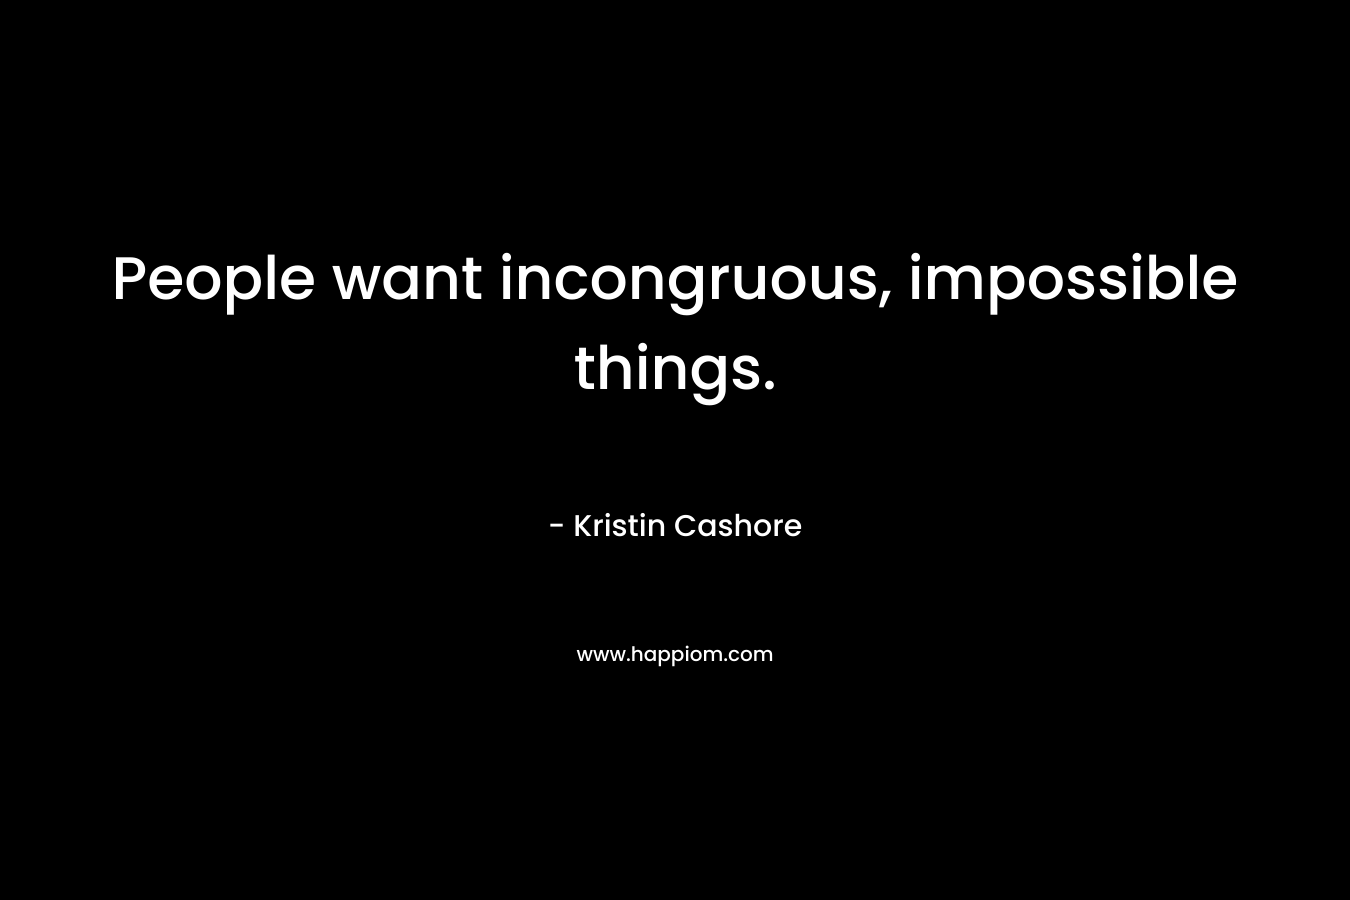 People want incongruous, impossible things.